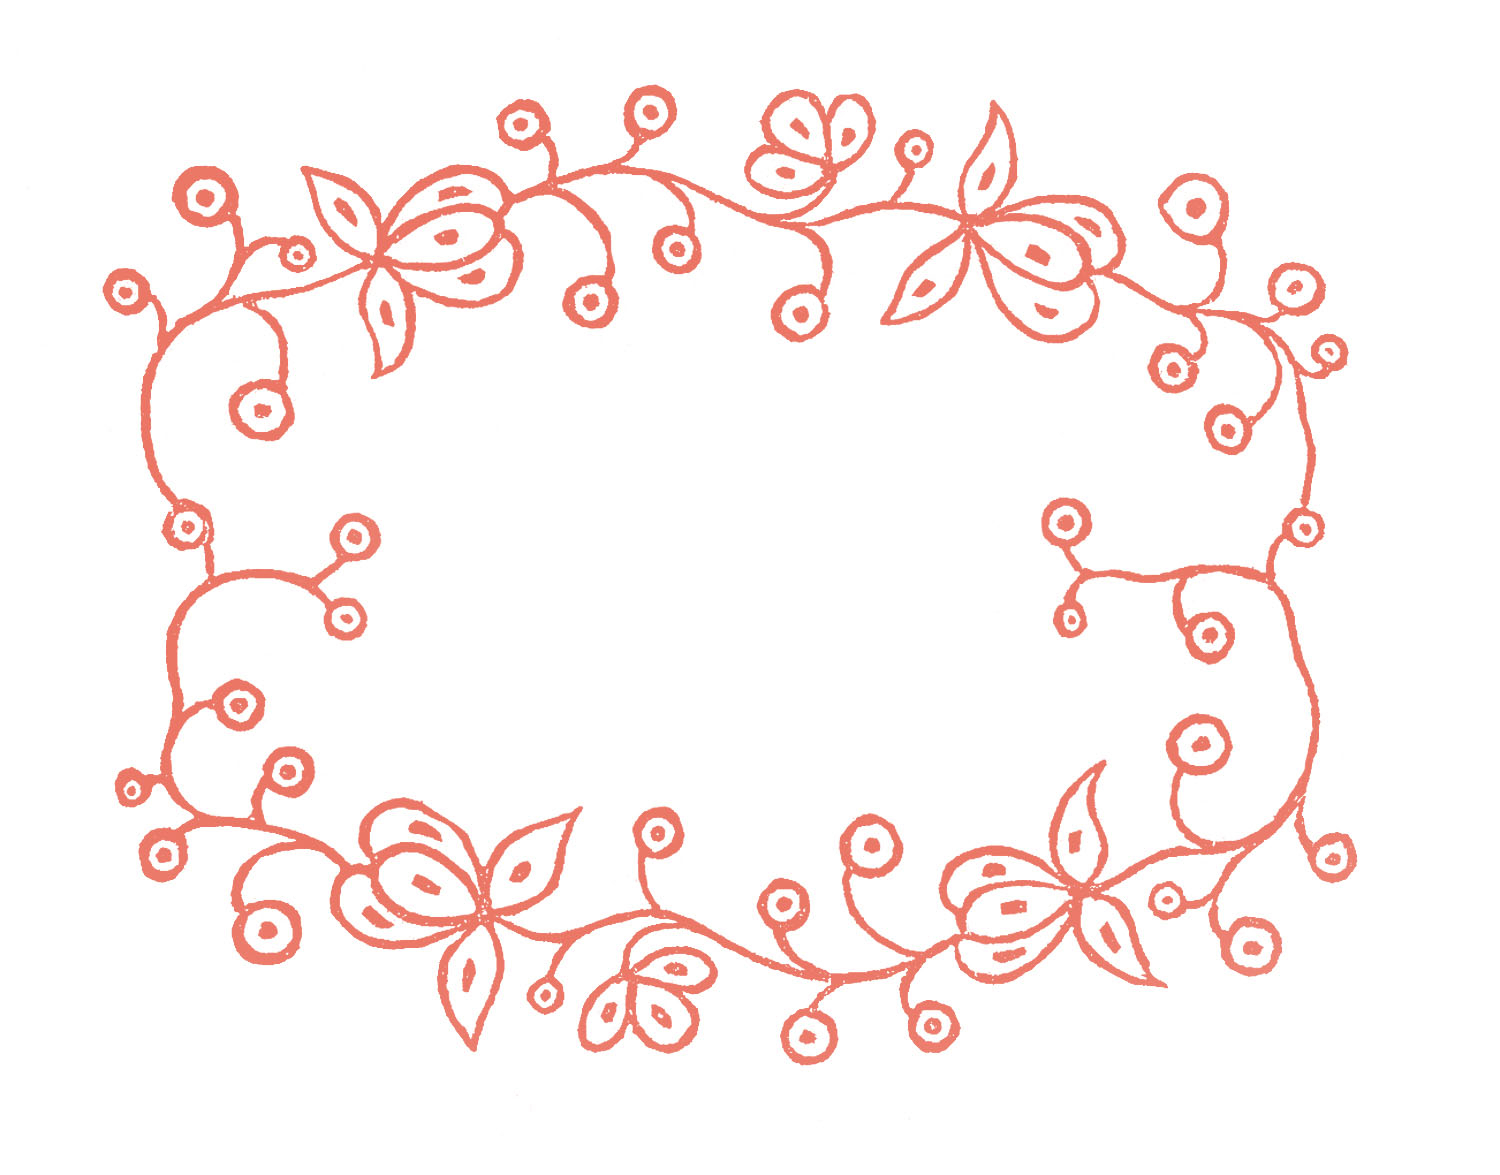 Embroidery Patterns Free Royalty Free Images Embroidery Patterns Floral Frames The